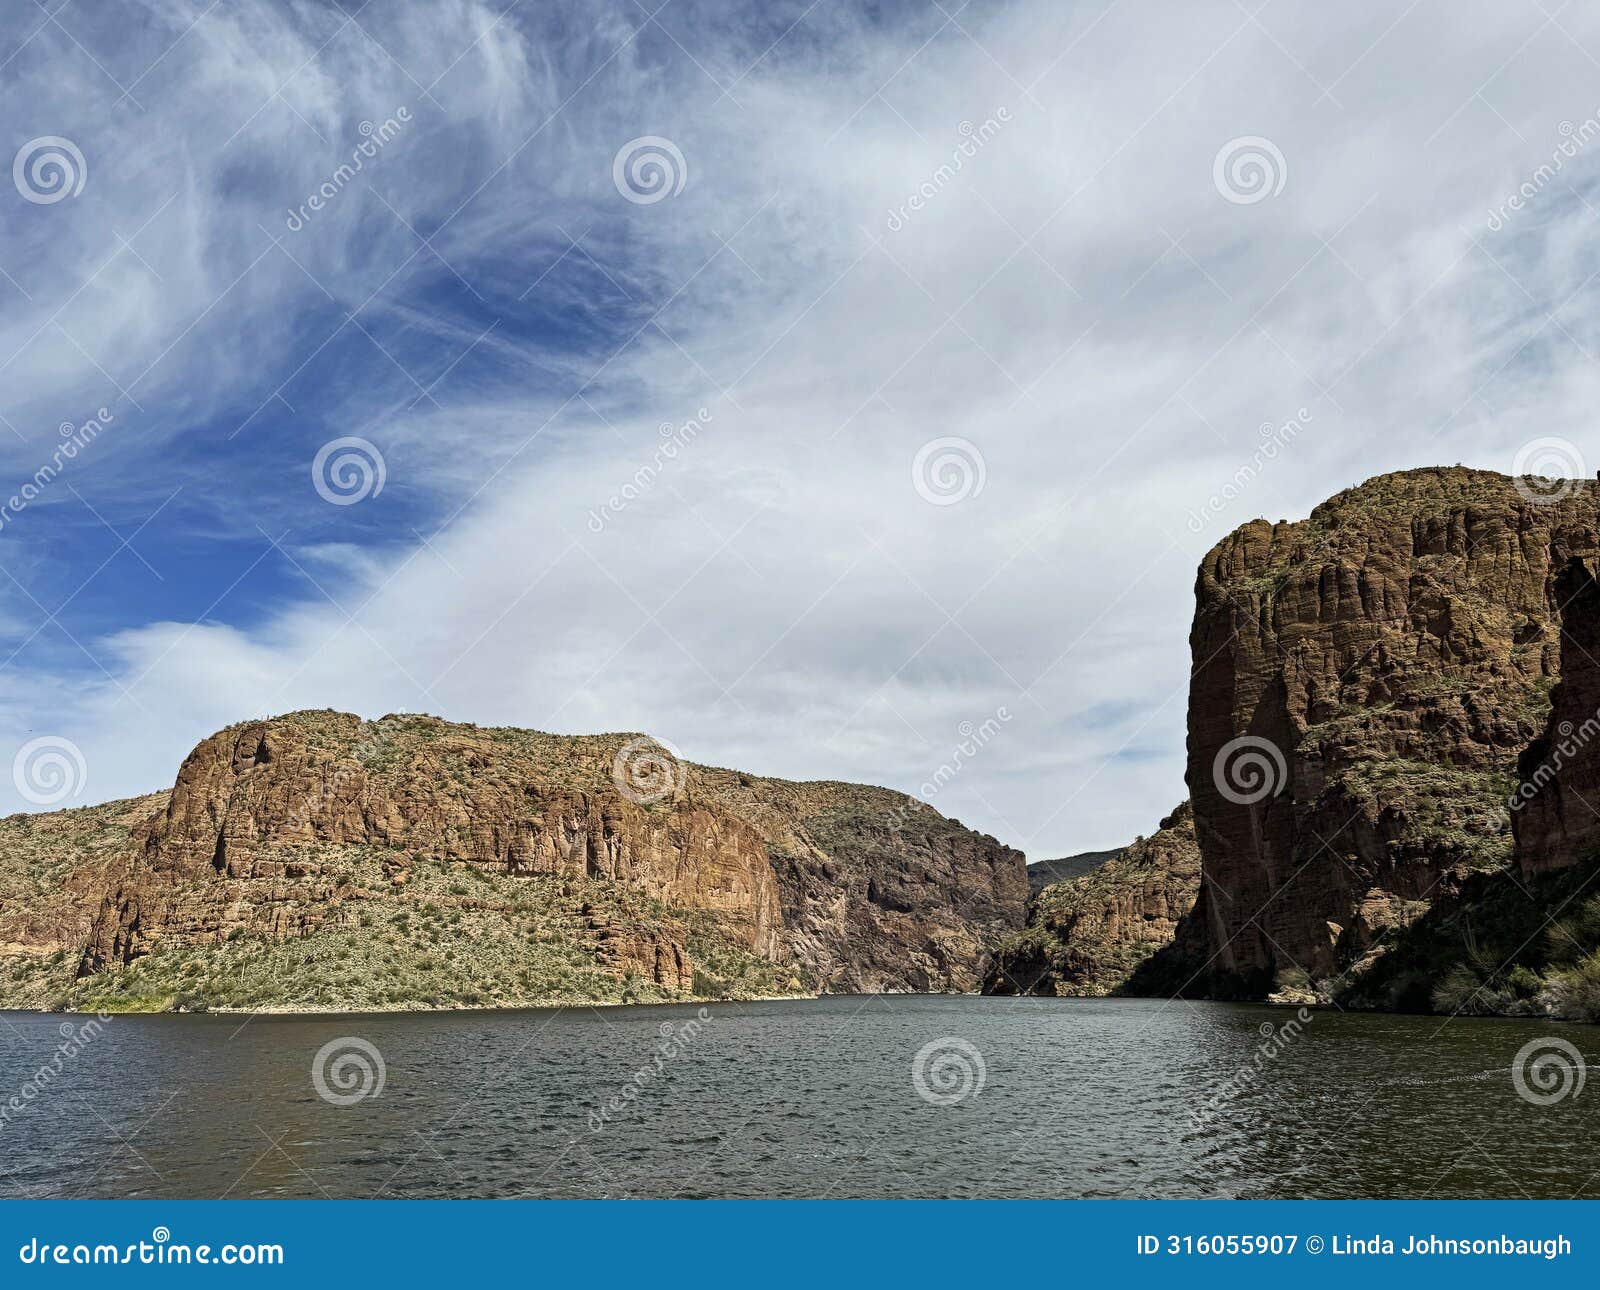 view of canyon lake and rock formations from a steamboat in arizona